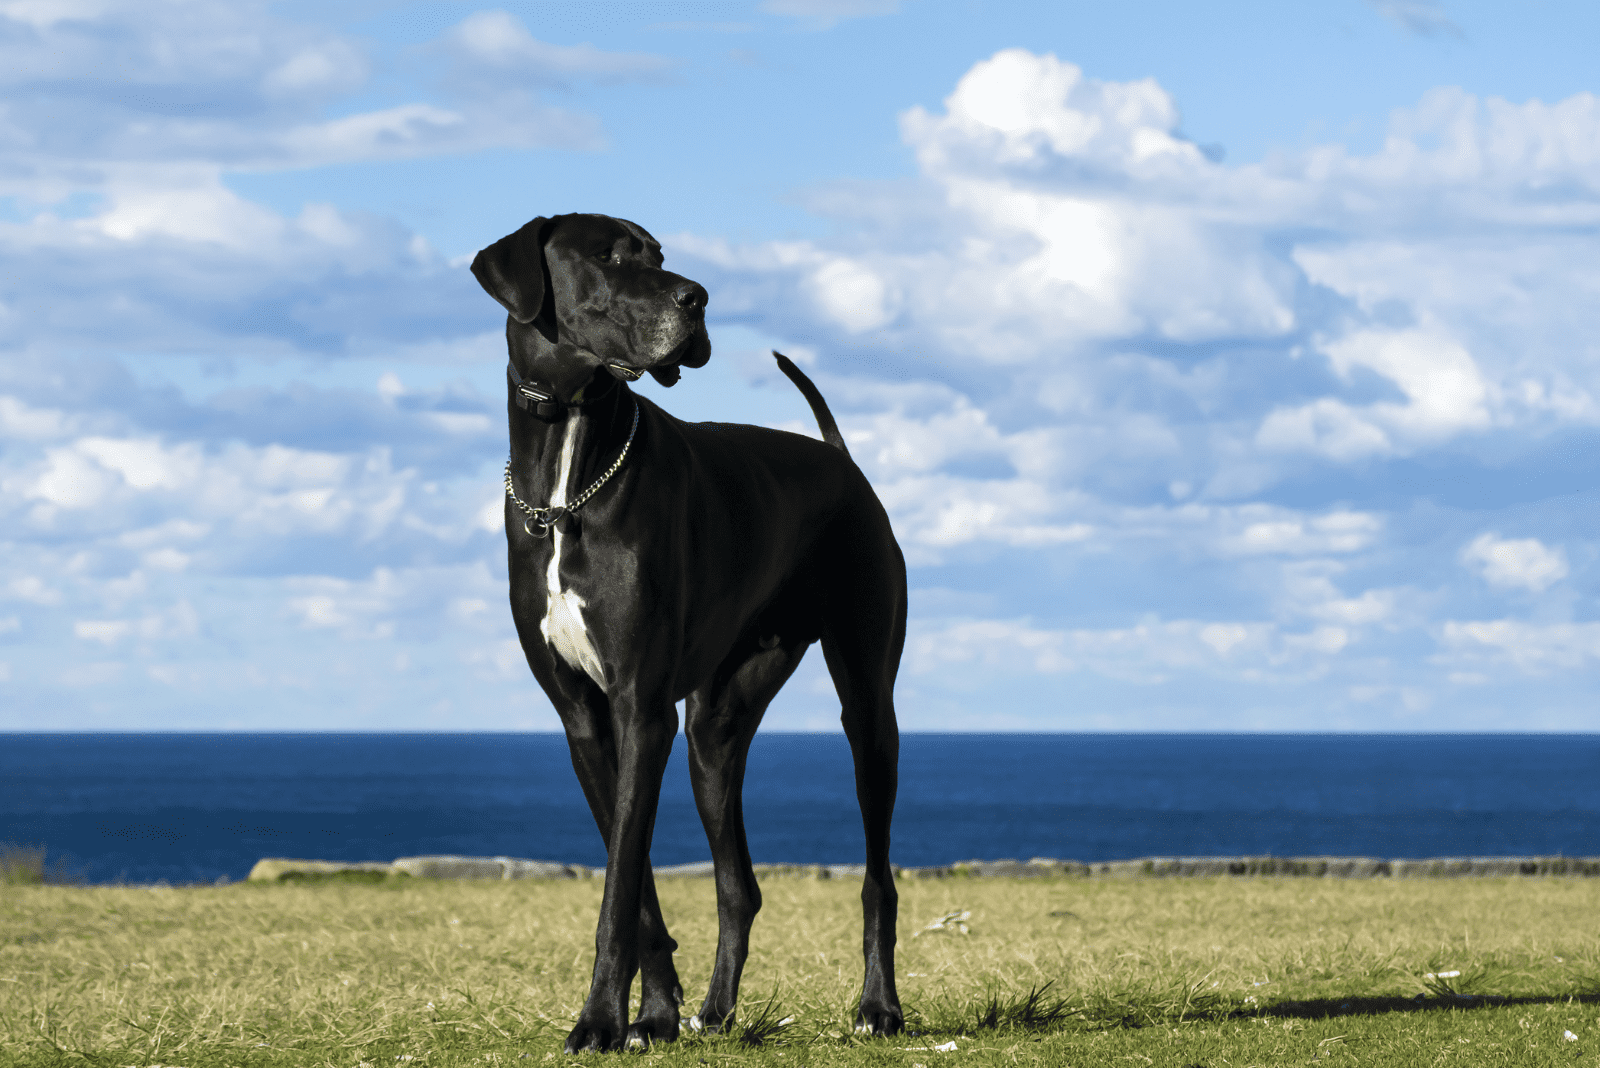 Great Dane stands in a field and looks away